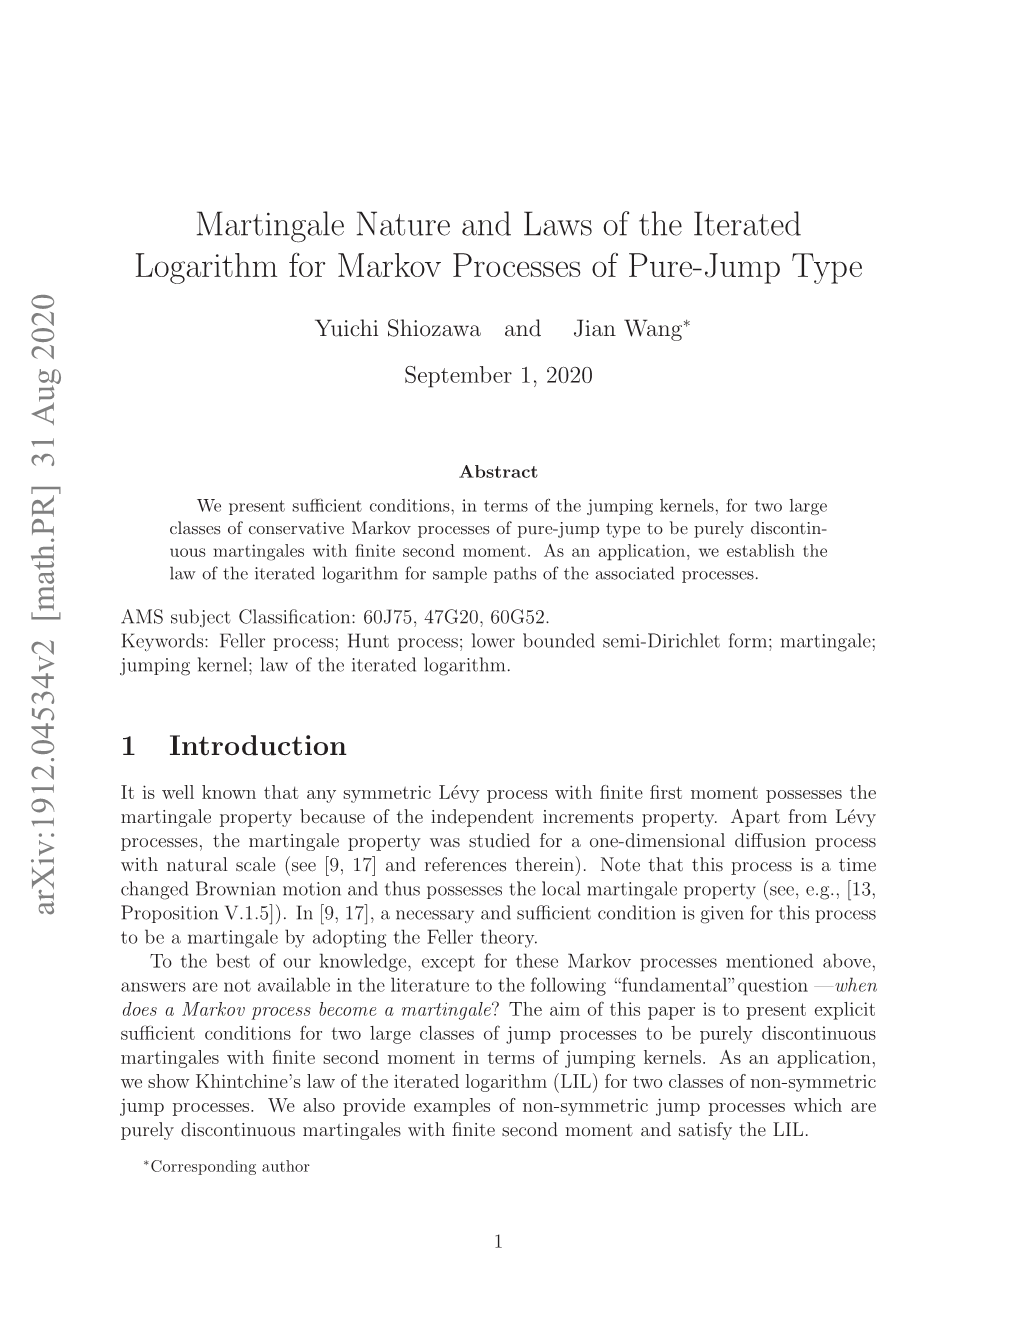 Martingale Nature and Laws of the Iterated Logarithm for Markov